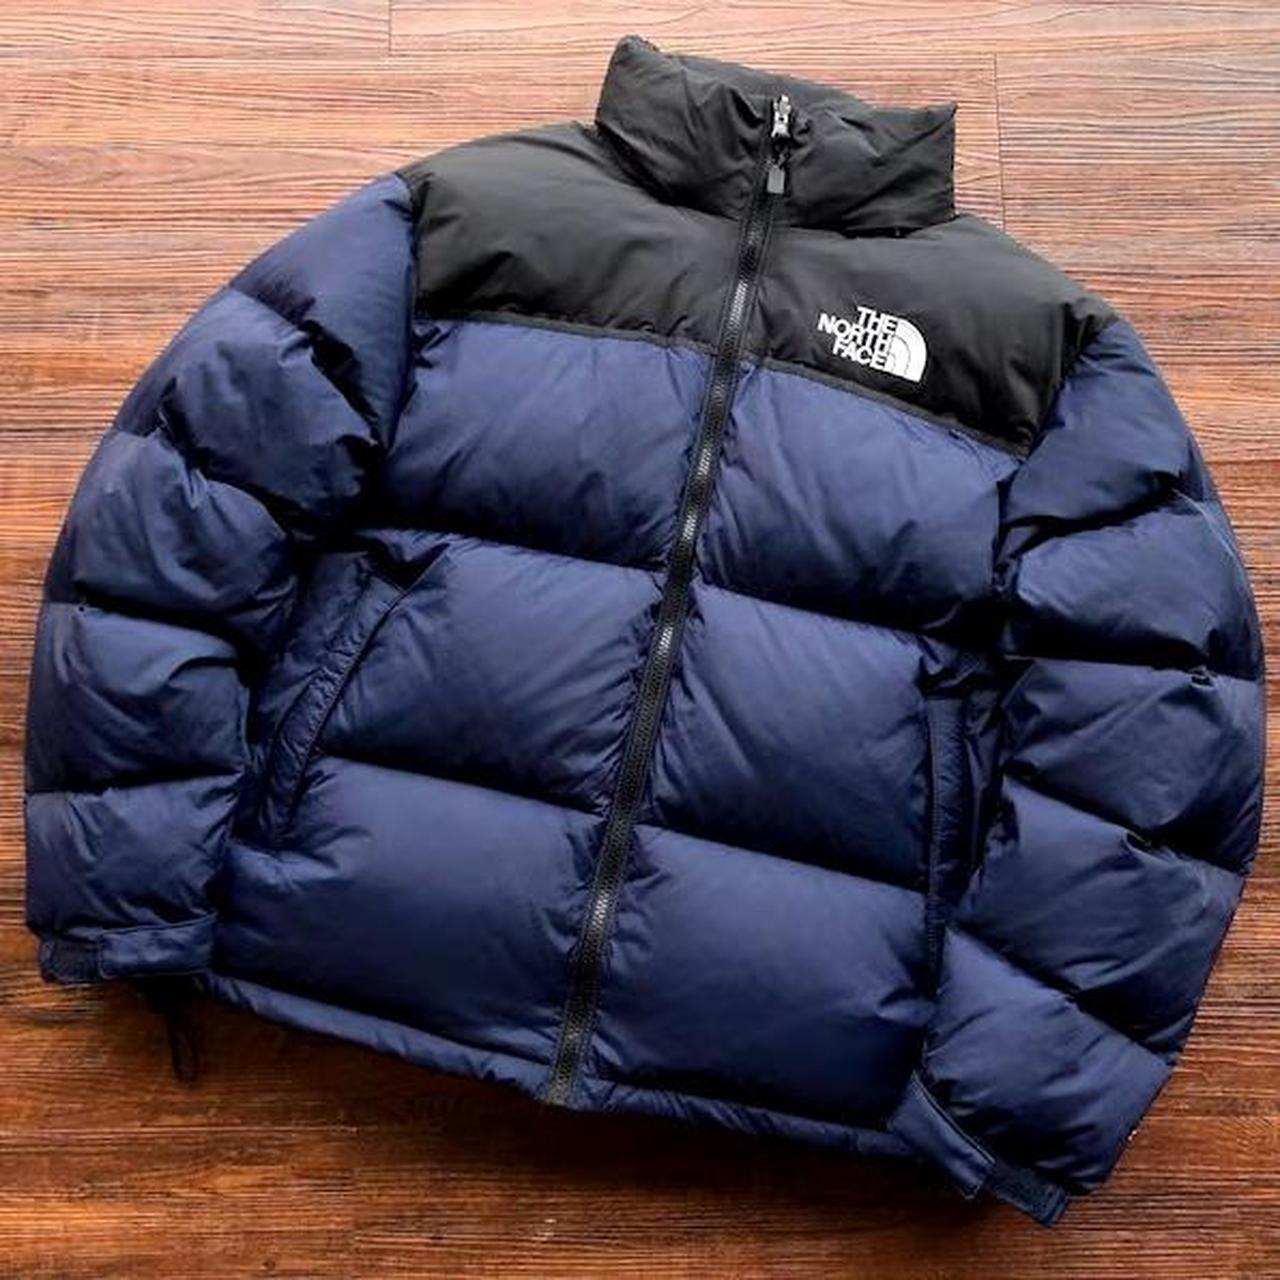 Black And Navy North Face Puffer Jacket - Depop